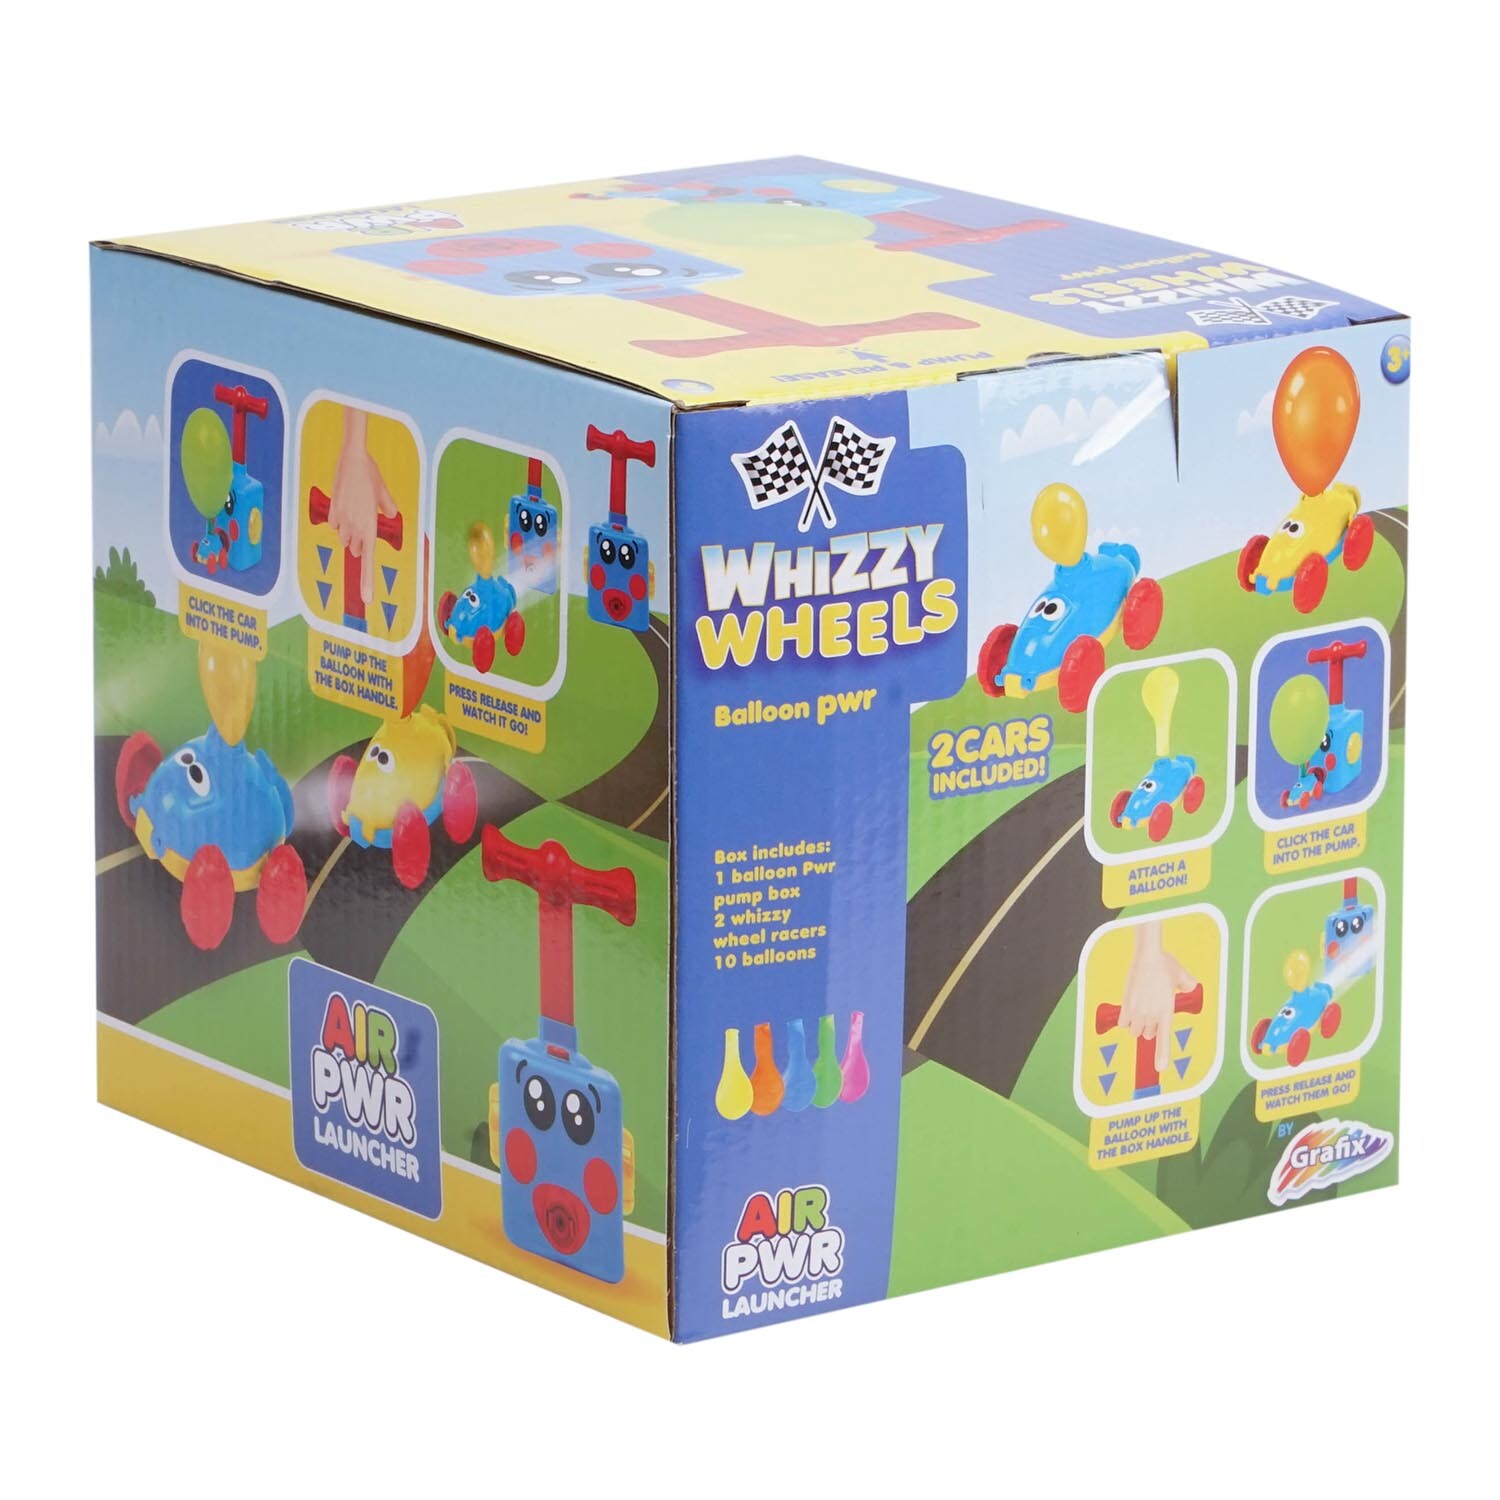 Whizzy Wheels Air Pwr Launcher Image 1